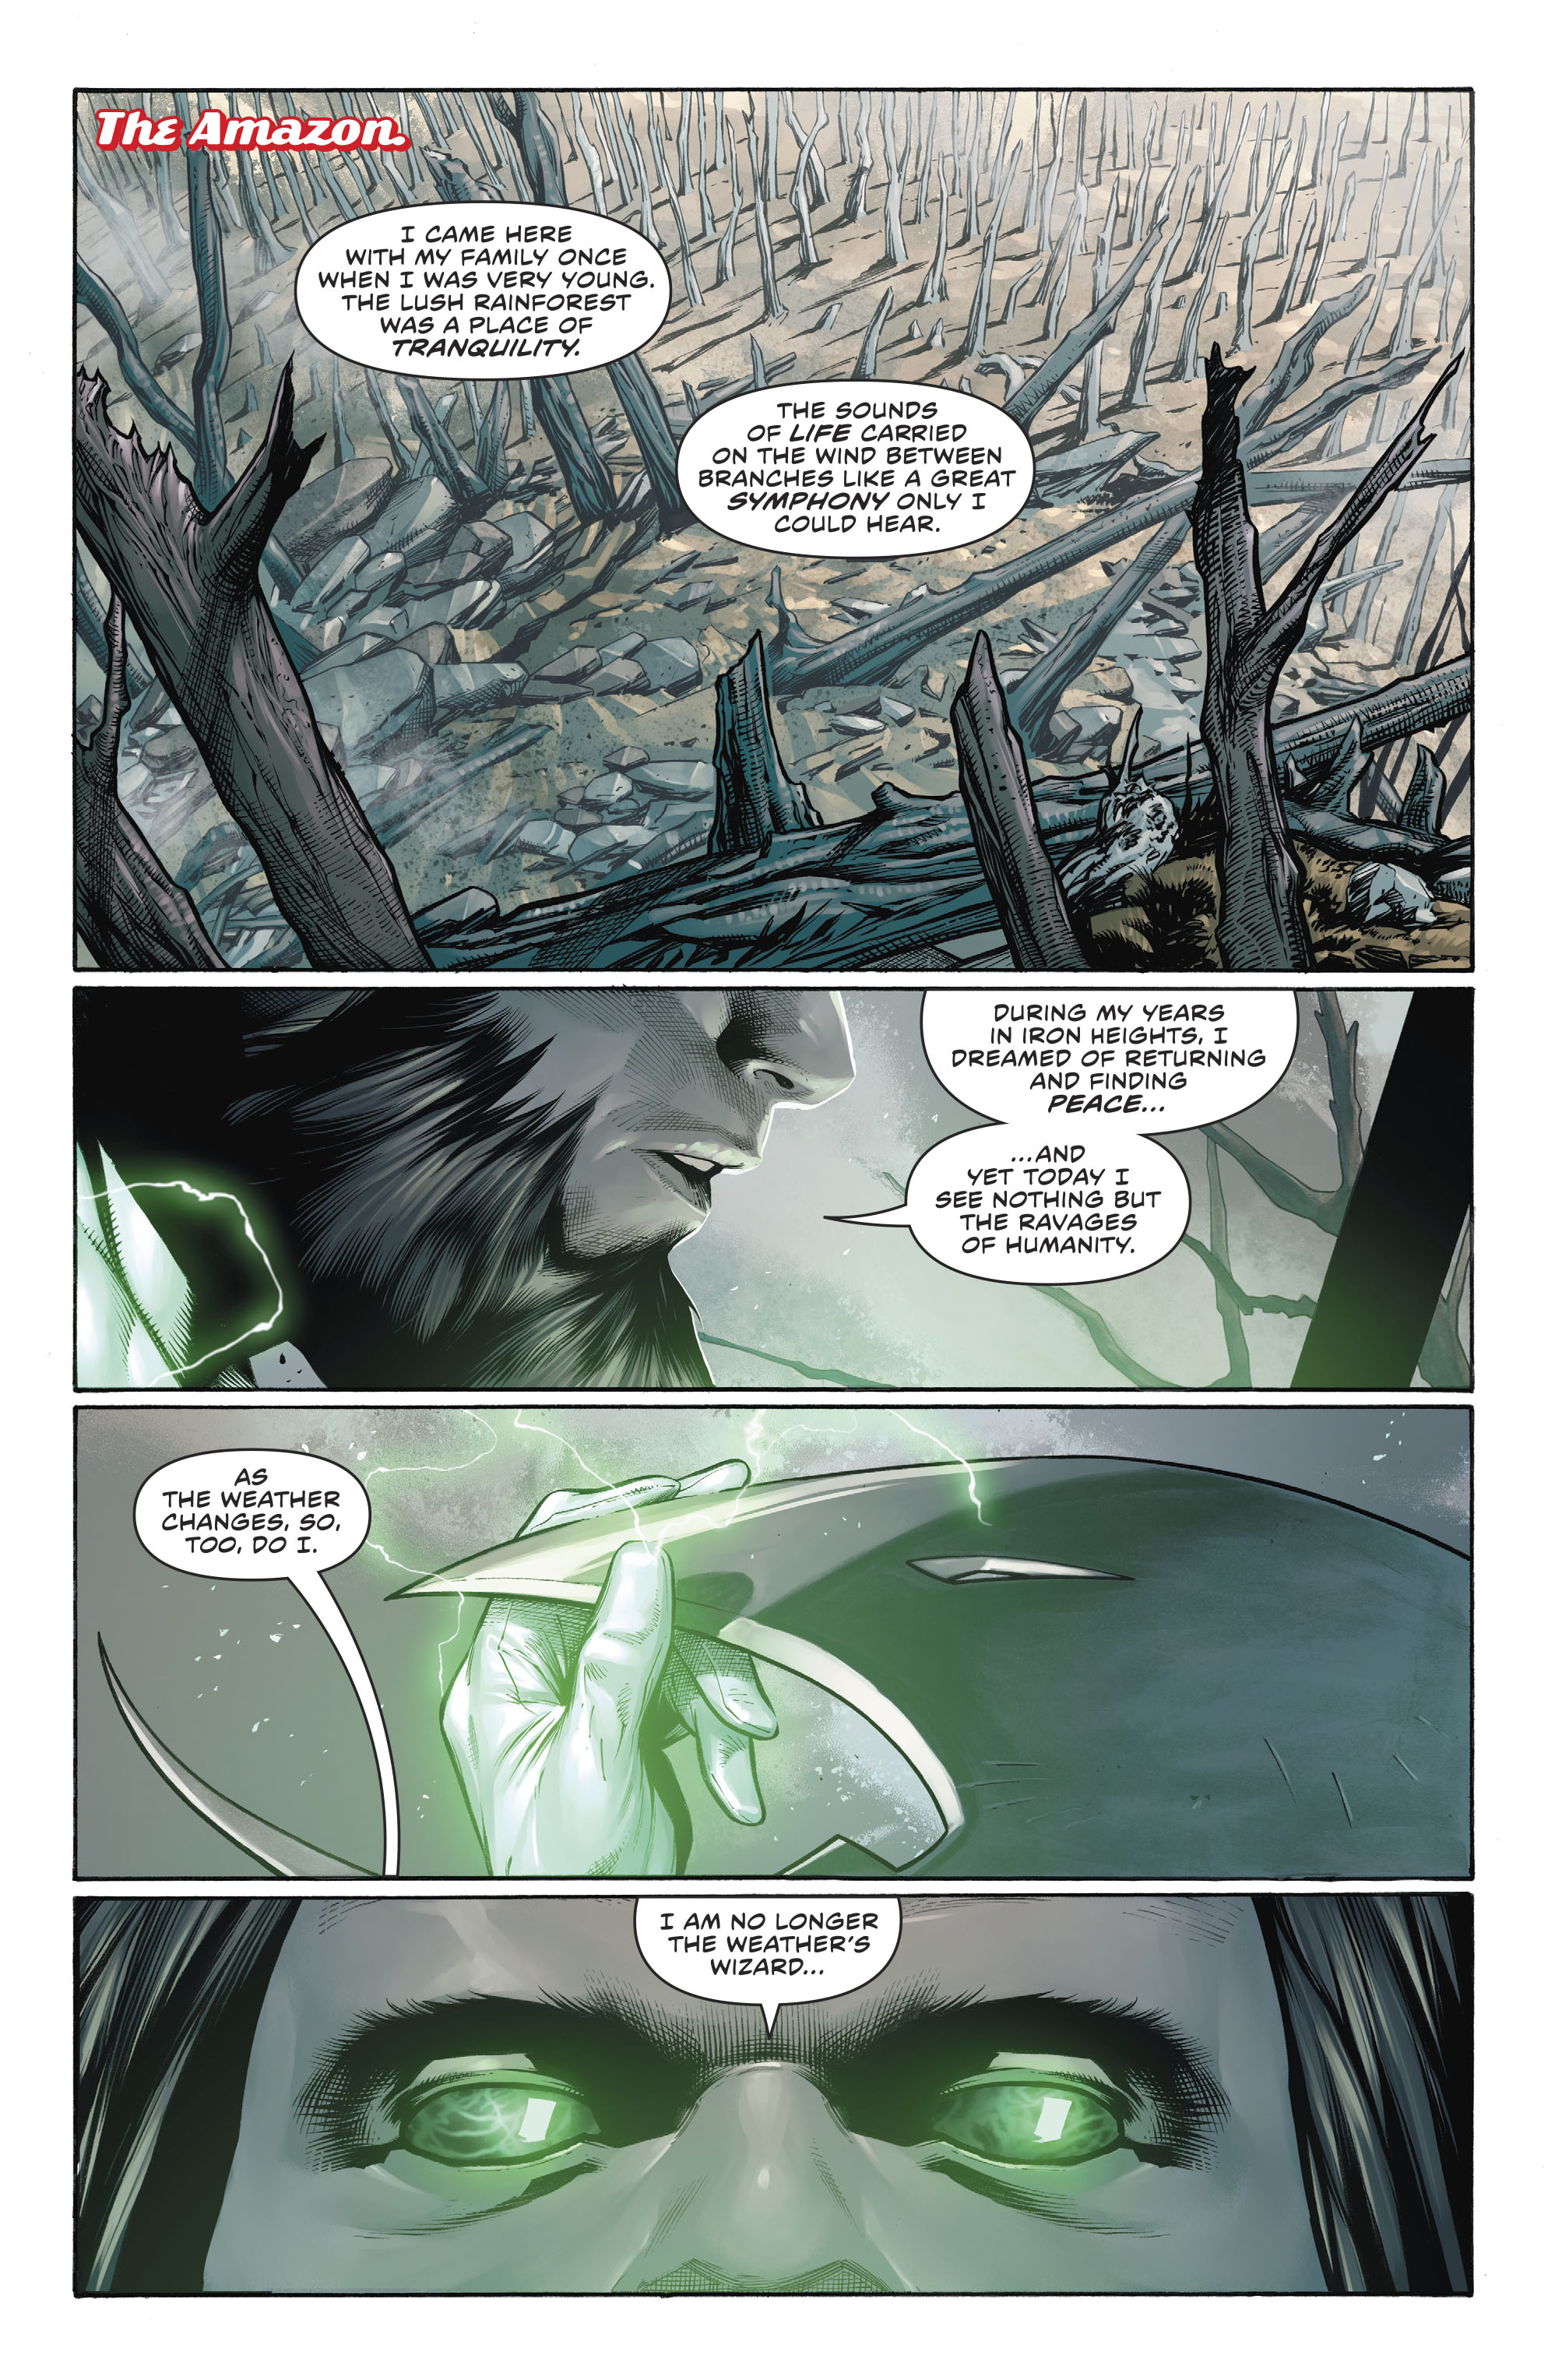 The Flash (2016-): Chapter 77 - Page 3